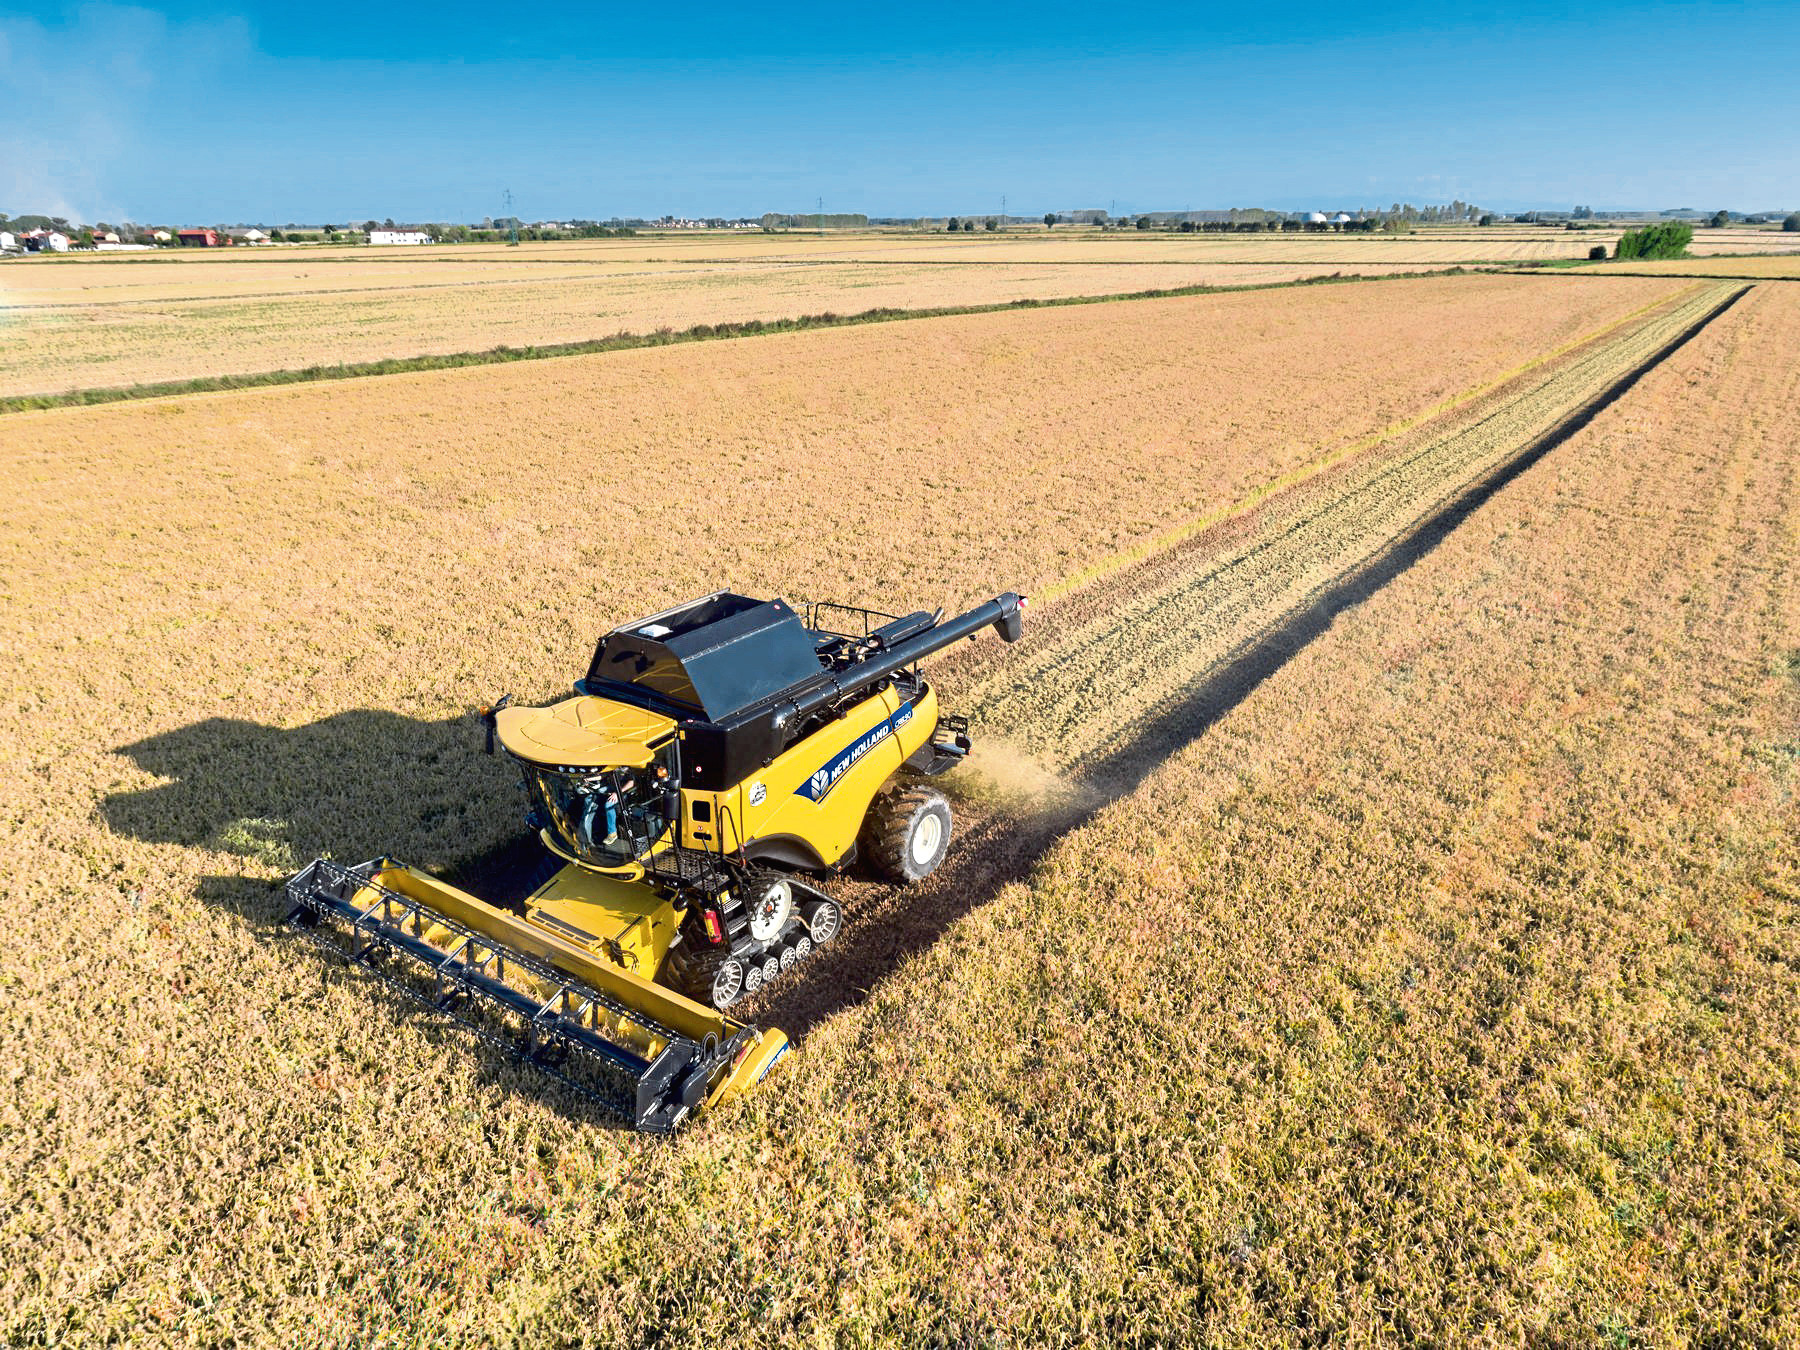 The company is a New Holland dealer.